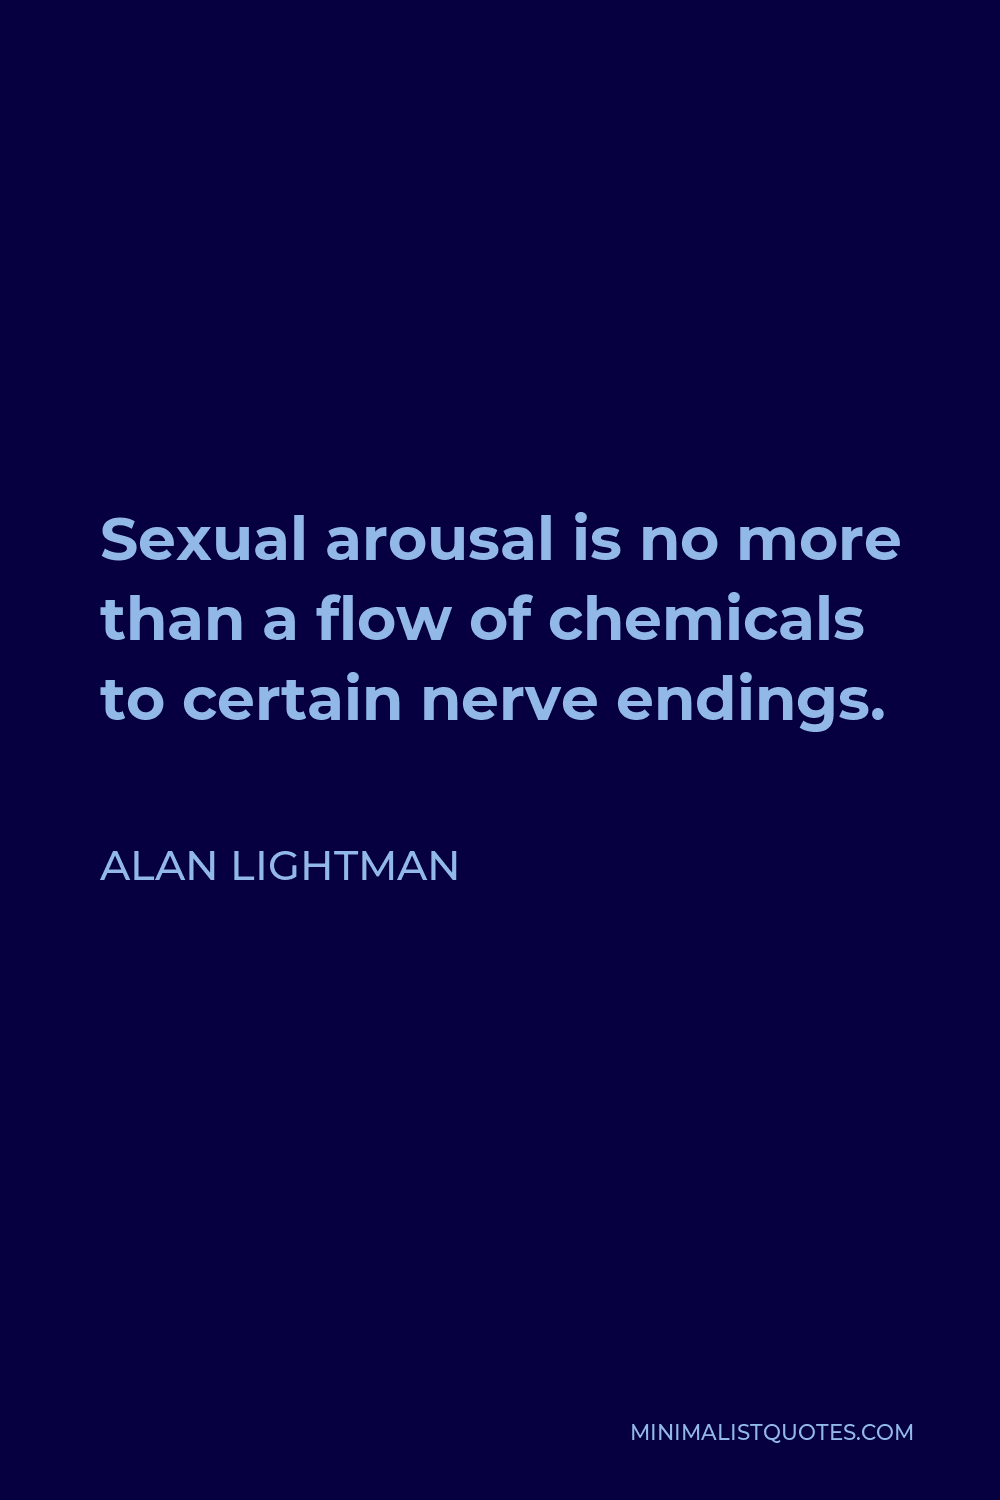 Alan Lightman Quote - Sexual arousal is no more than a flow of chemicals to certain nerve endings.